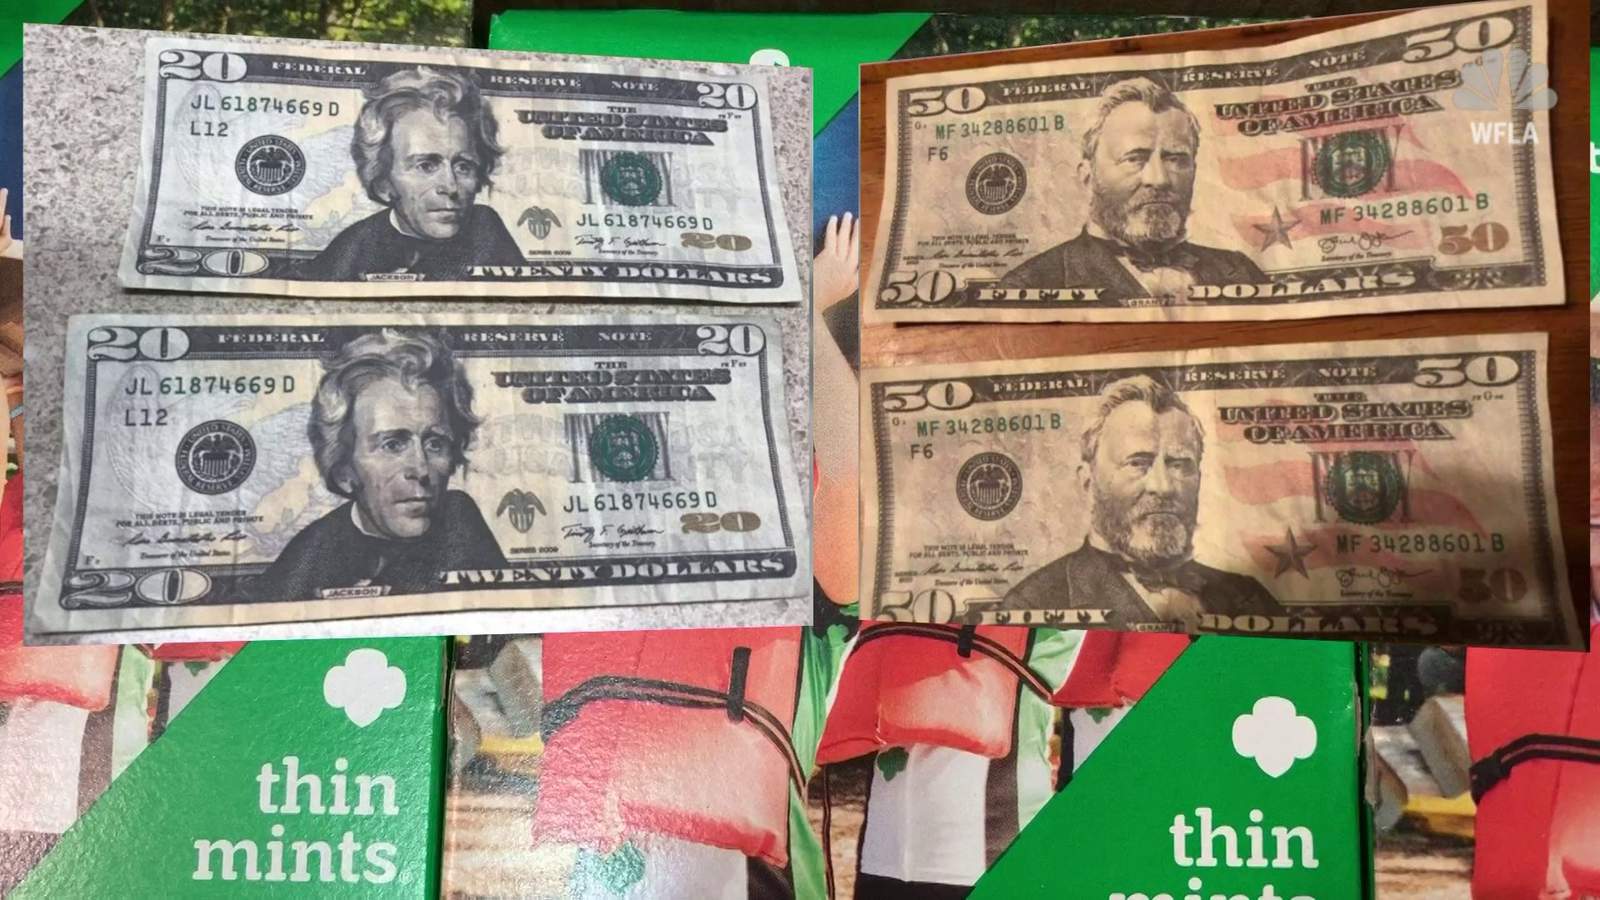 Man was arrested after allegedly using counterfeit money to buy Girl Scout cookies thumbnail